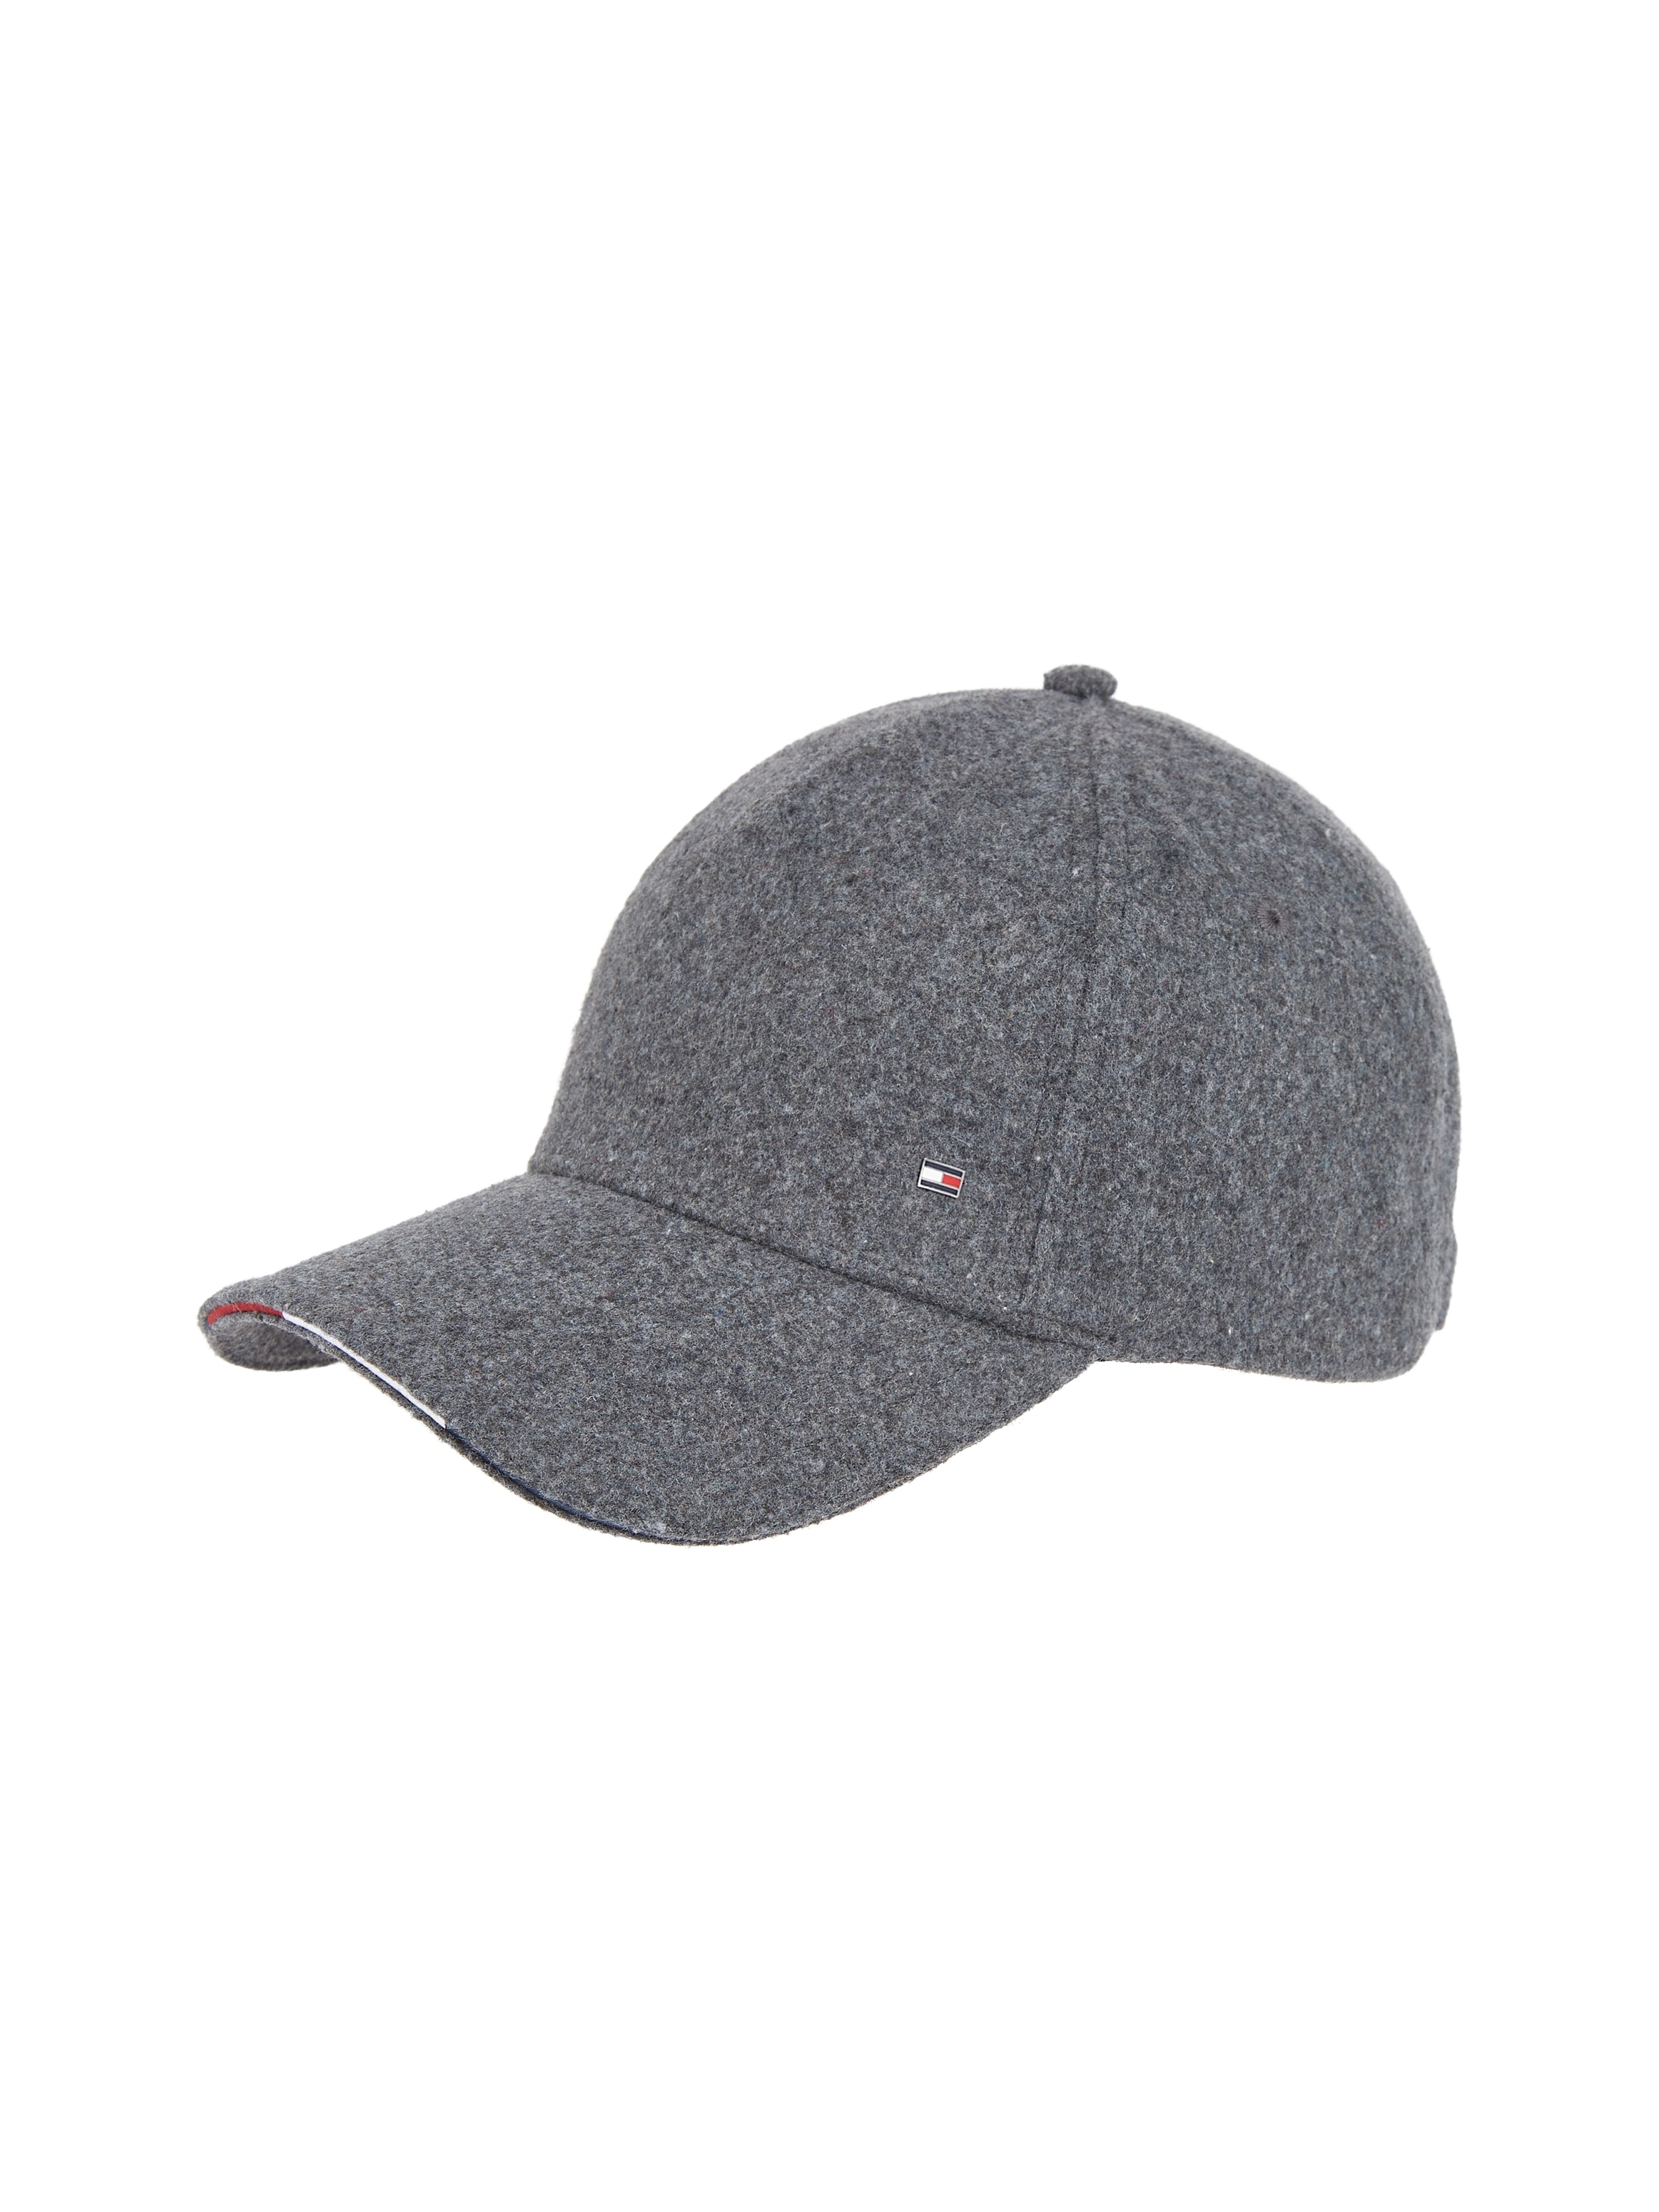 Tommy Hilfiger Baseball Cap »ELEVATED und Tape CORPORATE Tommy- Flag mit bei CAP«, online UNIVERSAL